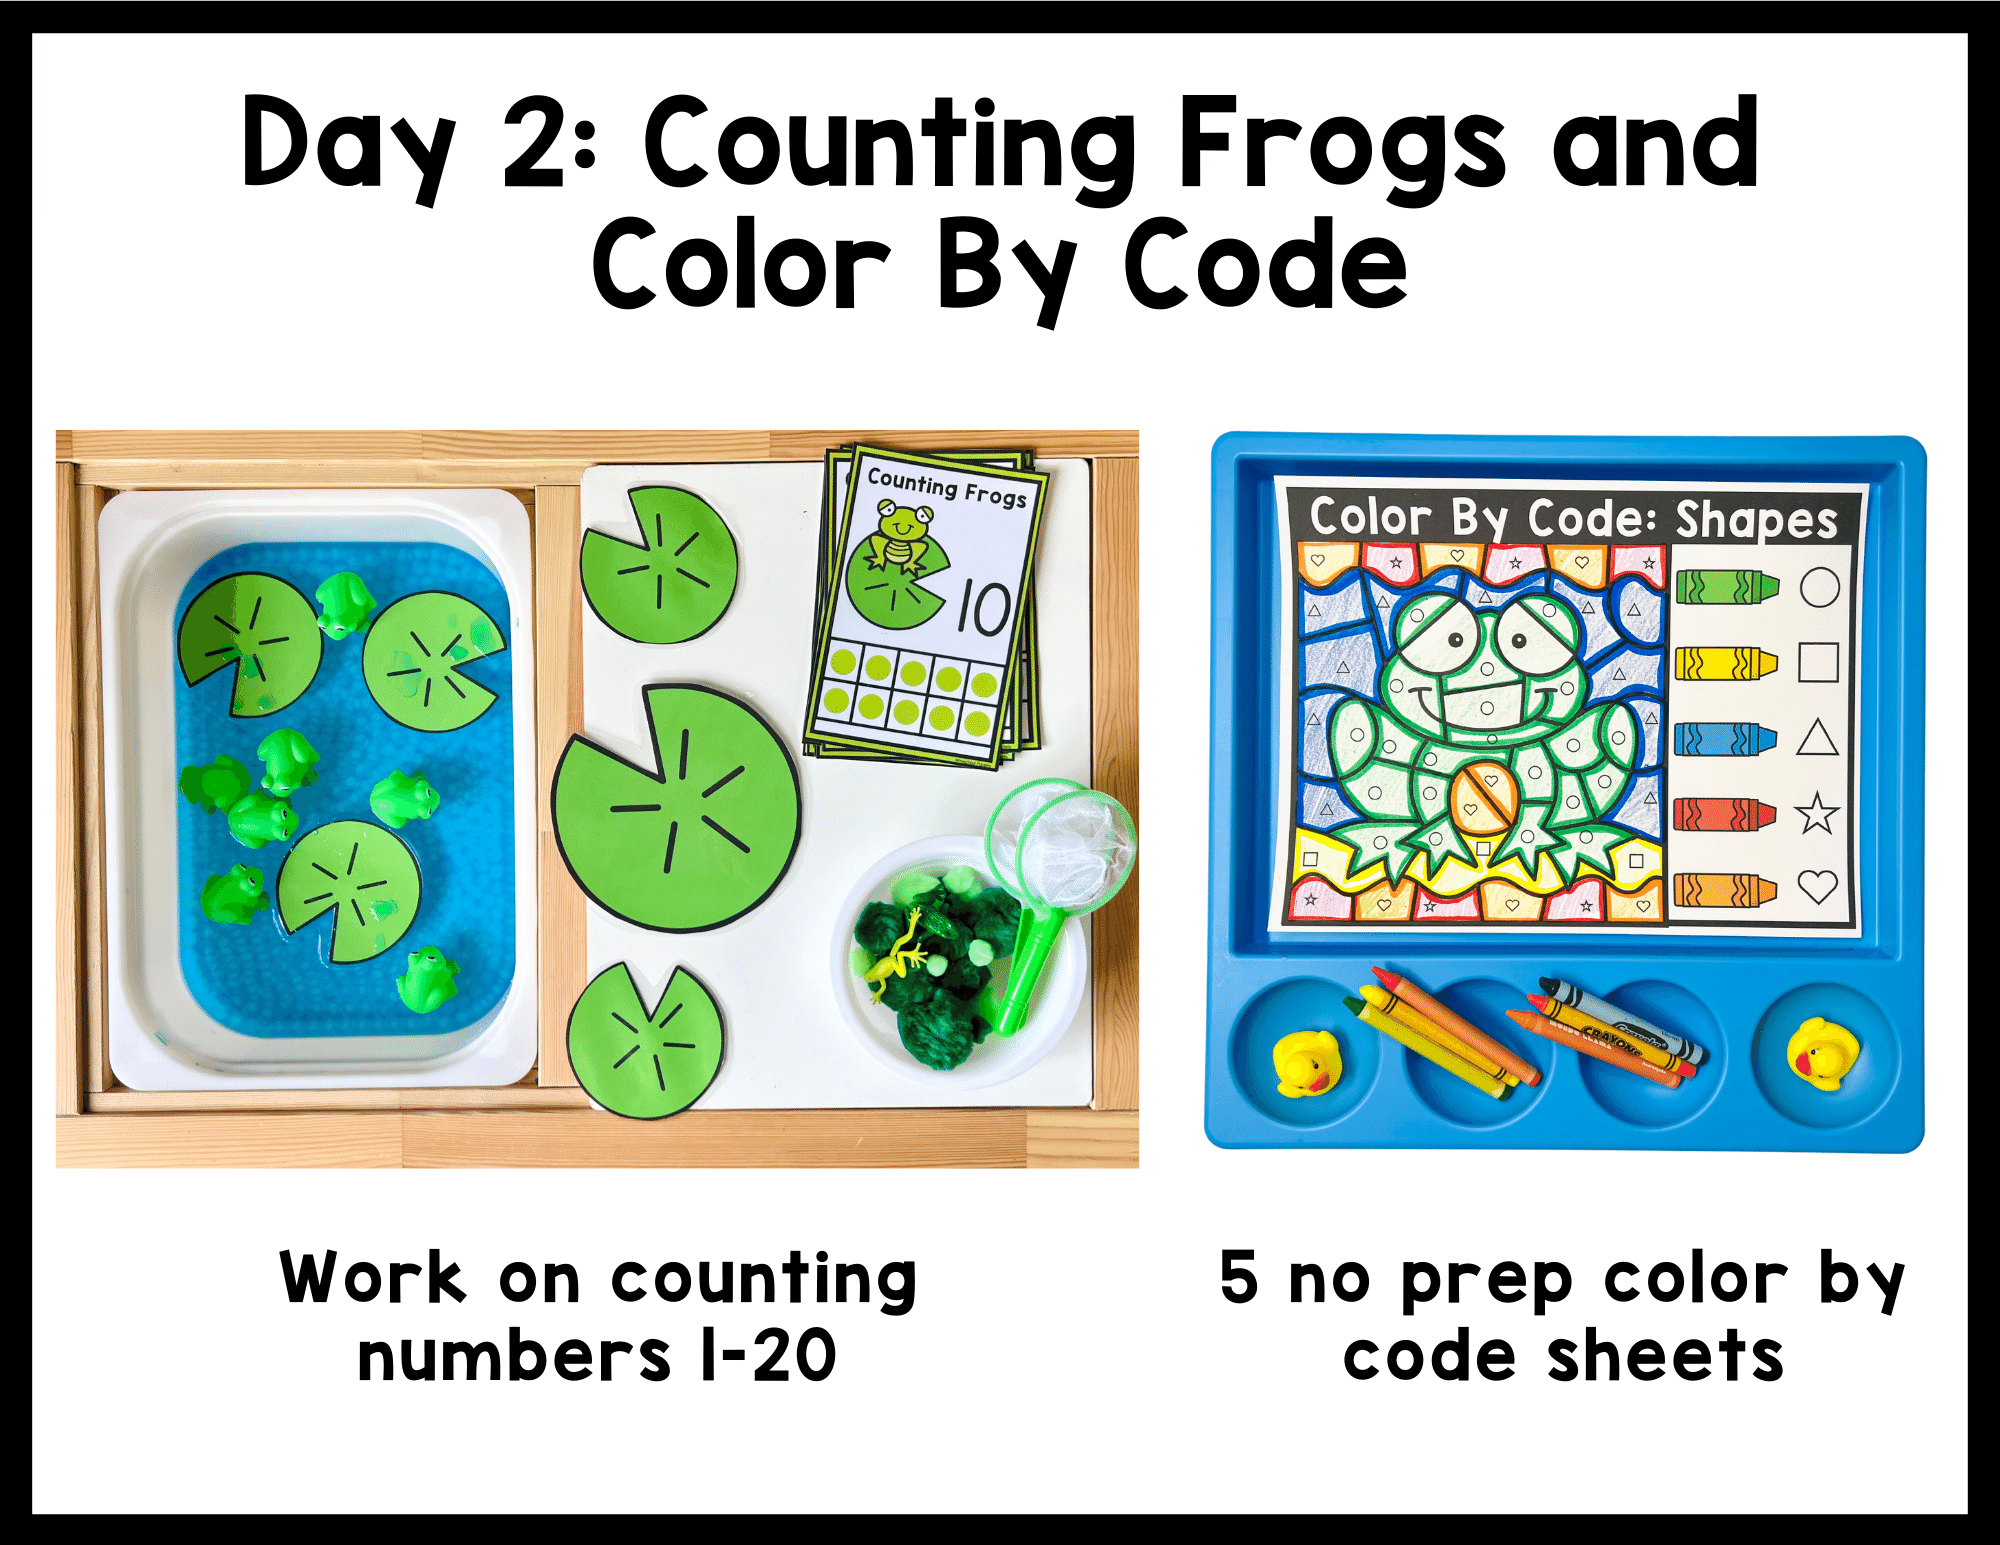 Frog in a Pond - Color by Numbers